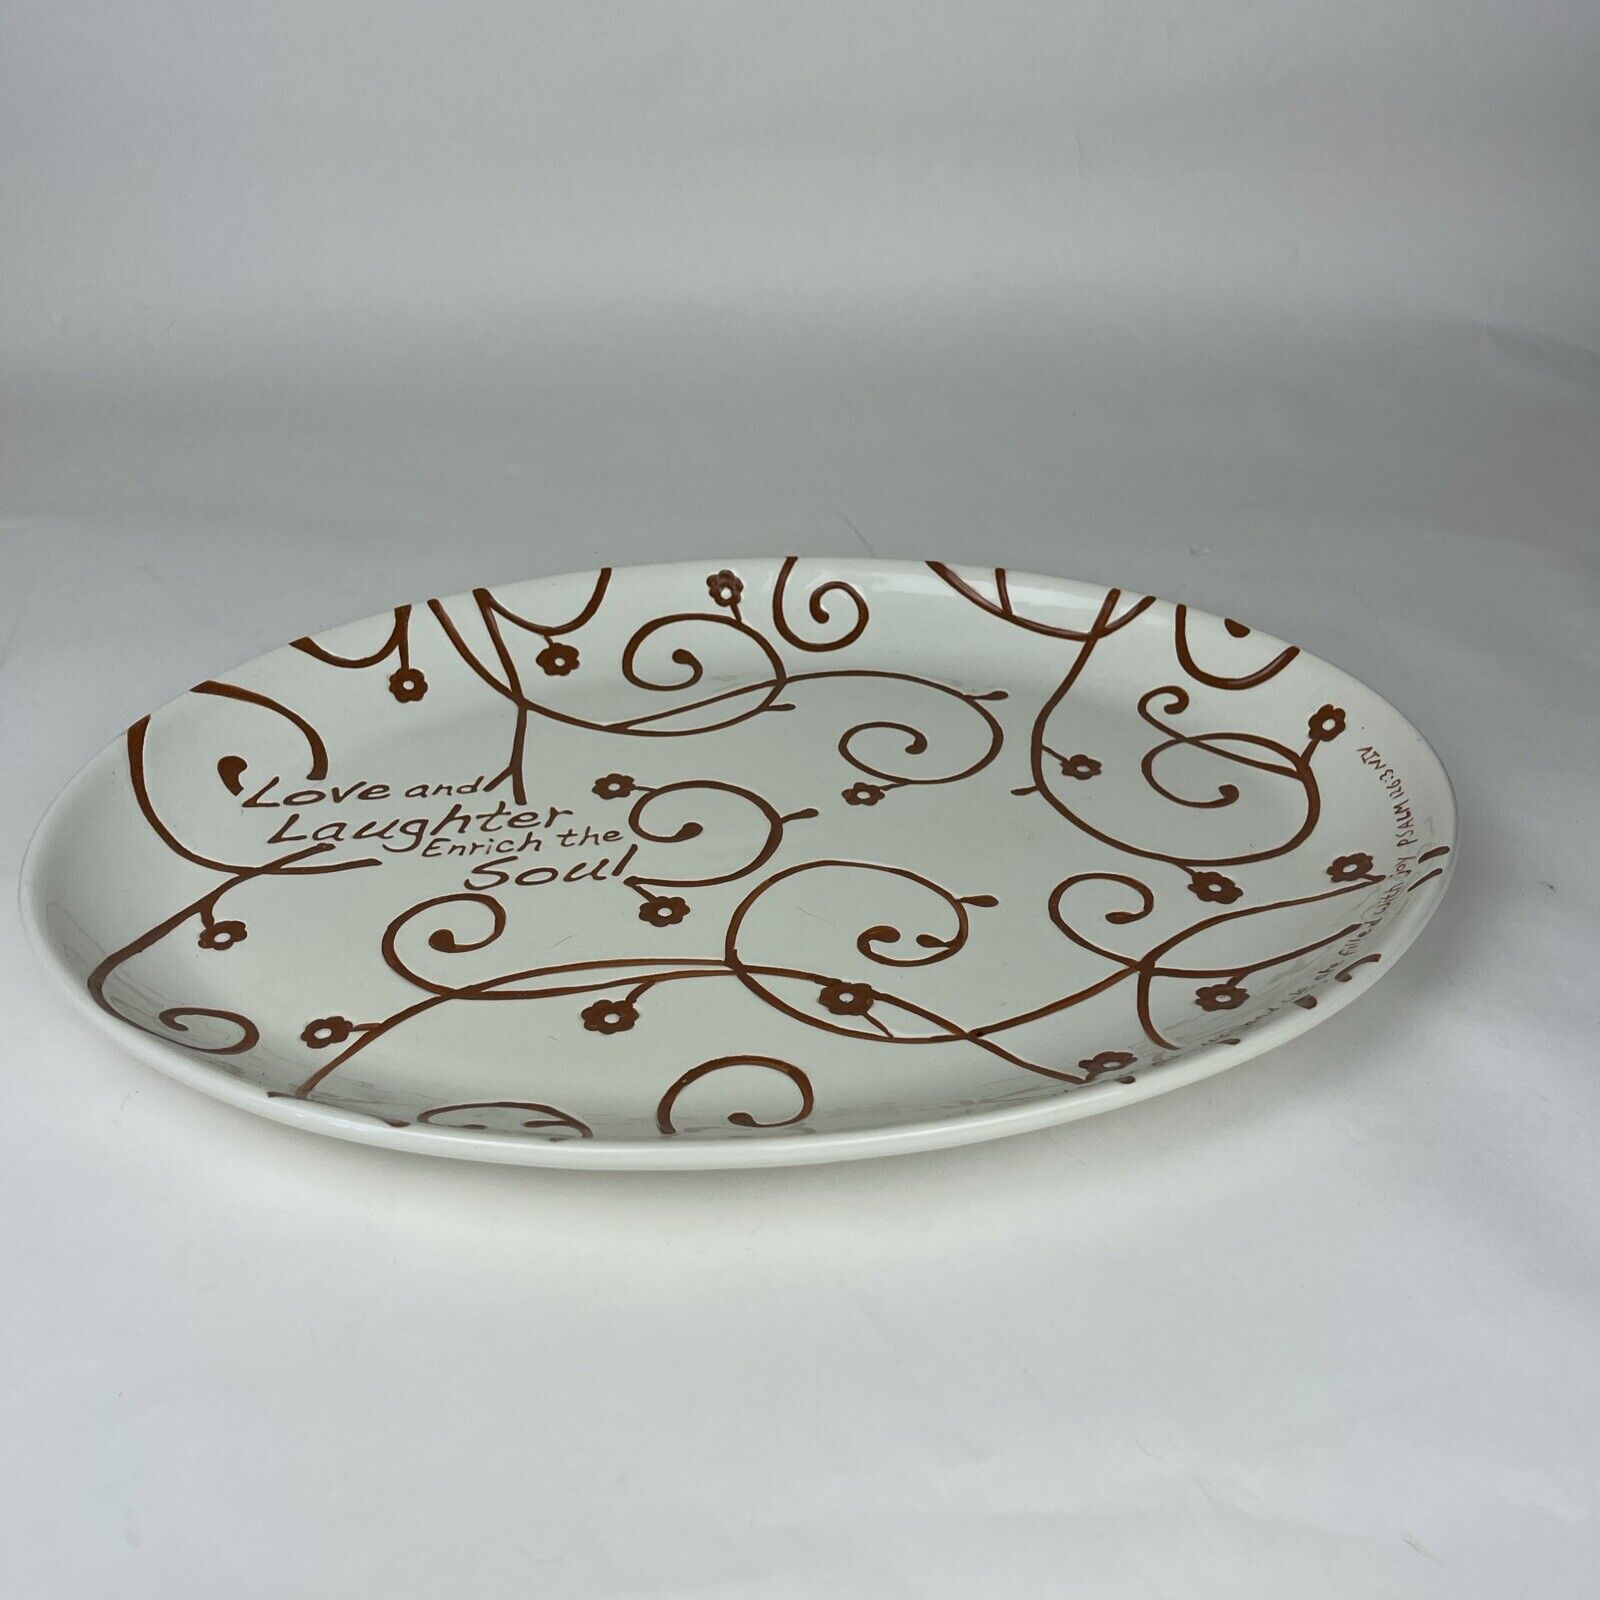 Blessings Unlimited Celebration Ceramic Plate 19 X 14 Inch Raised Design 2010